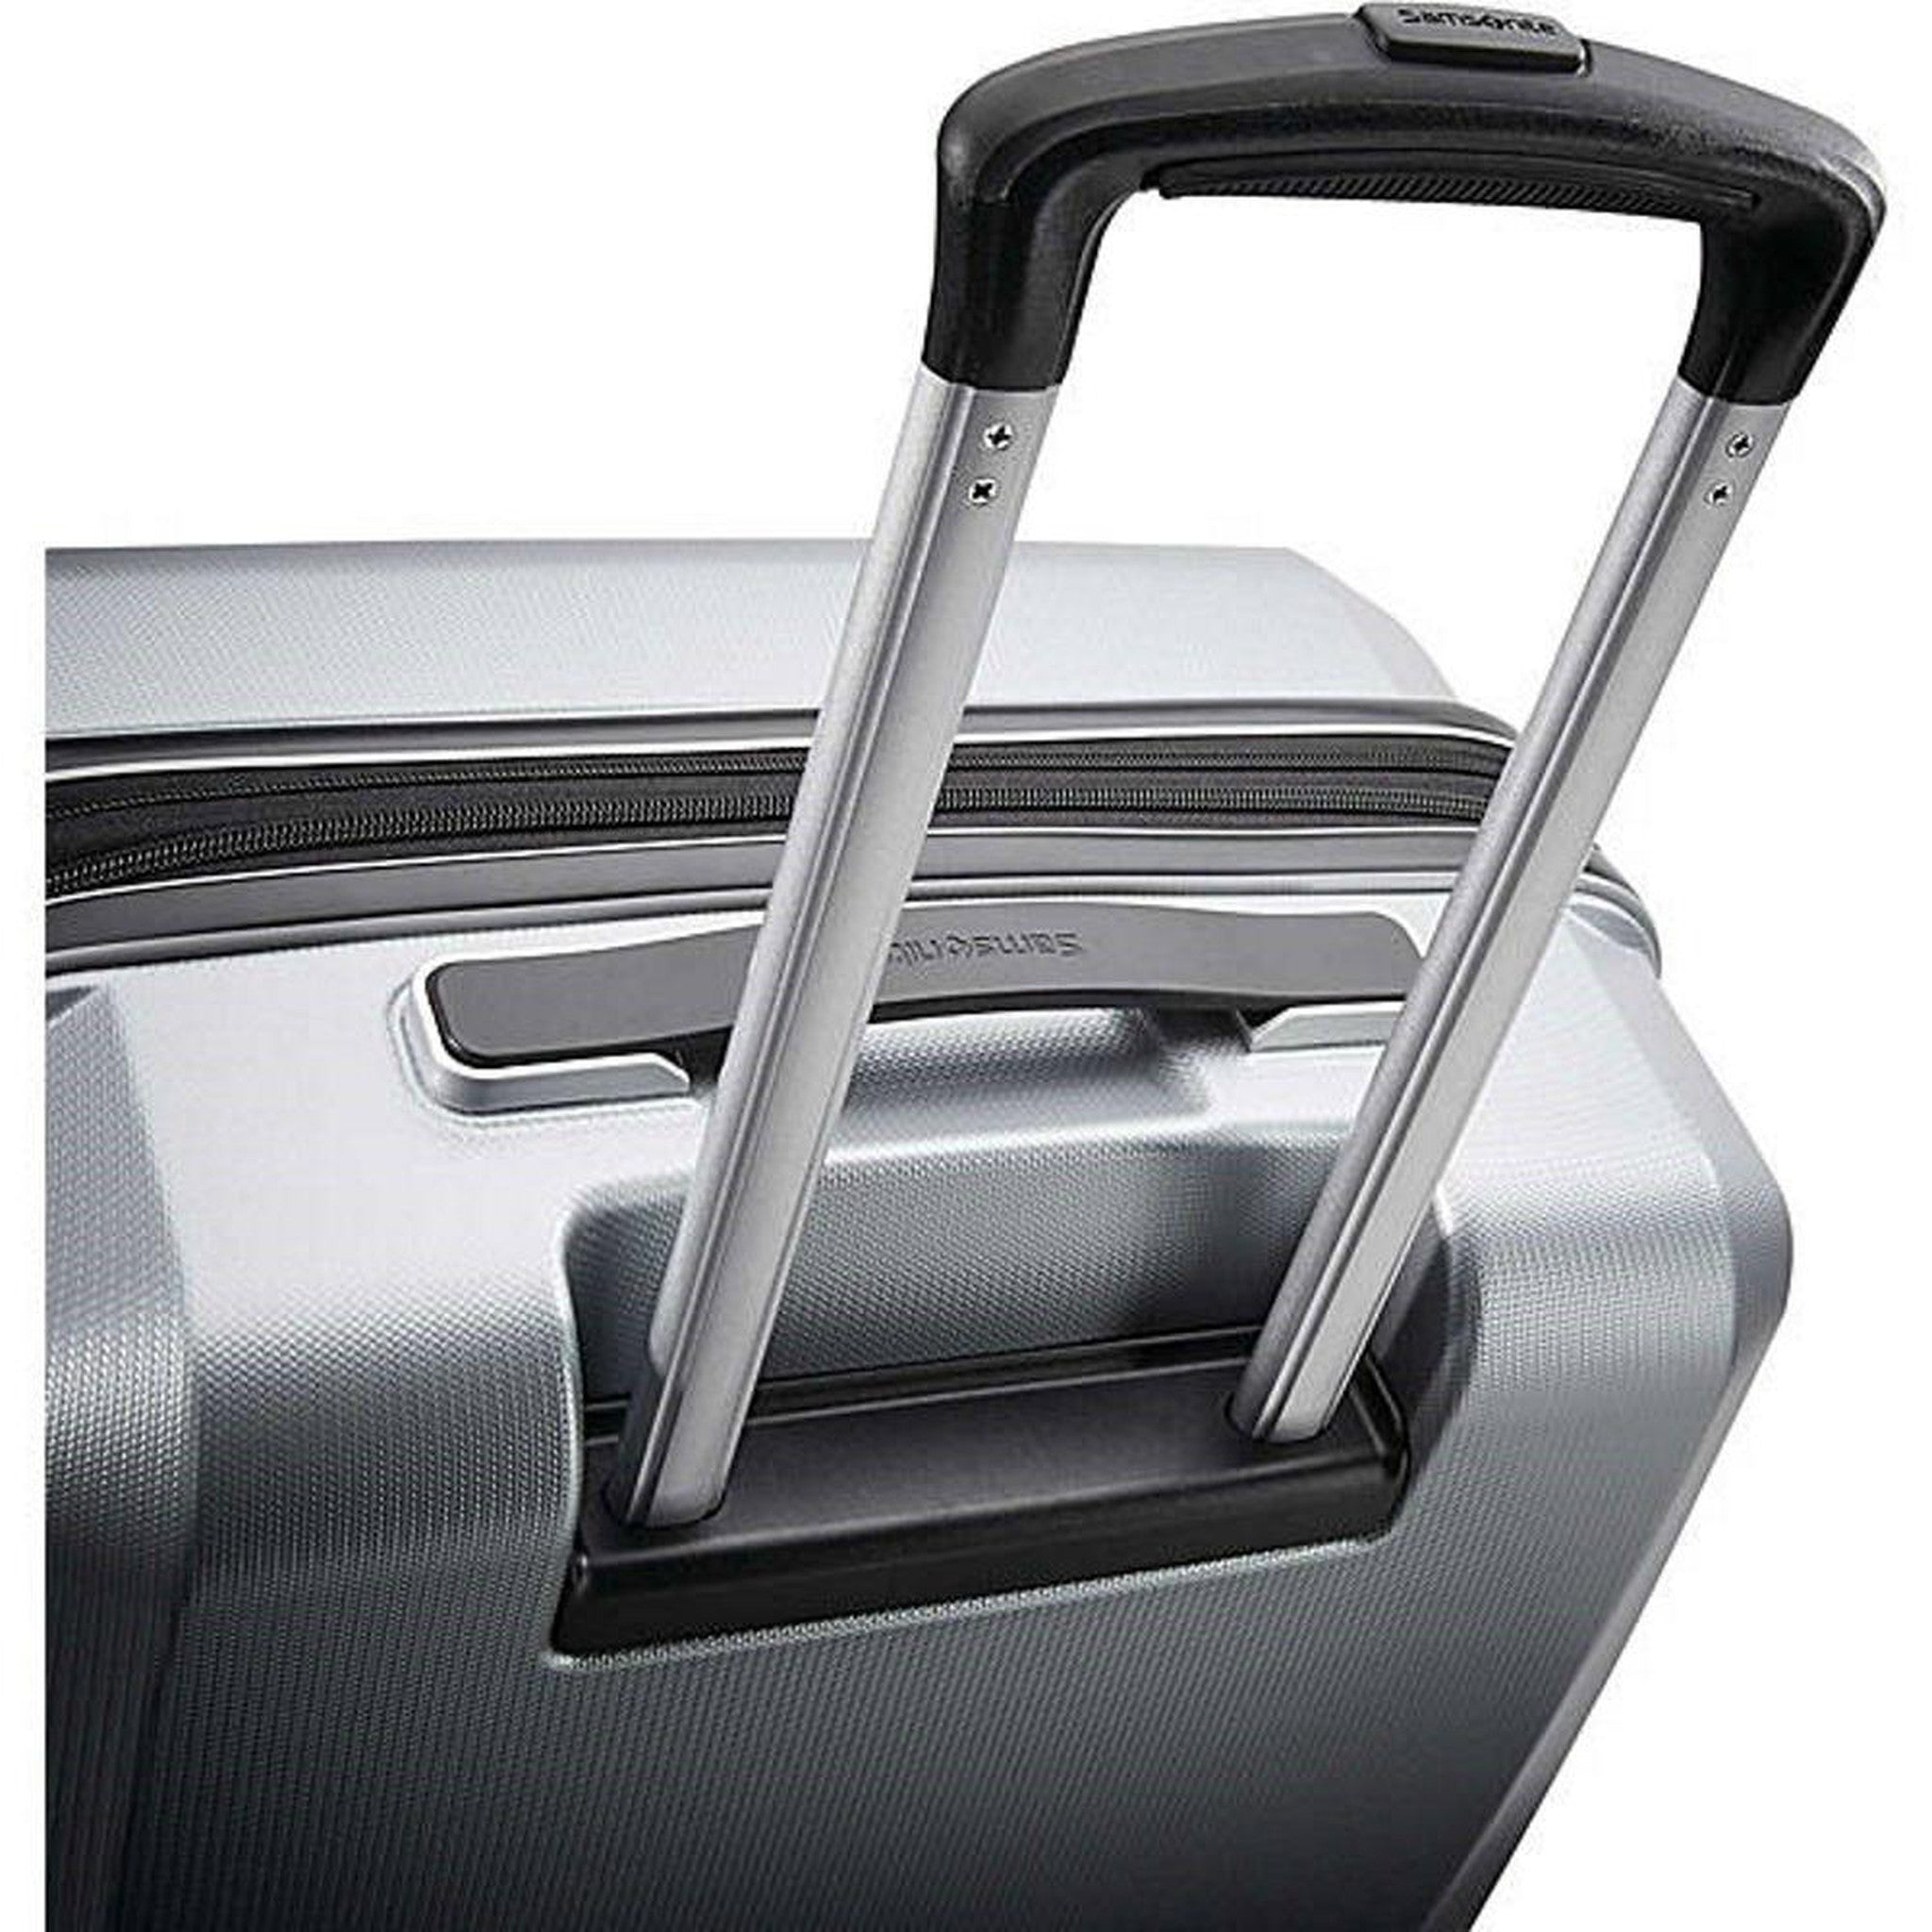 American Tourister Color Spin 2.0 Hardside Luggage 2-Piece Set, Silver